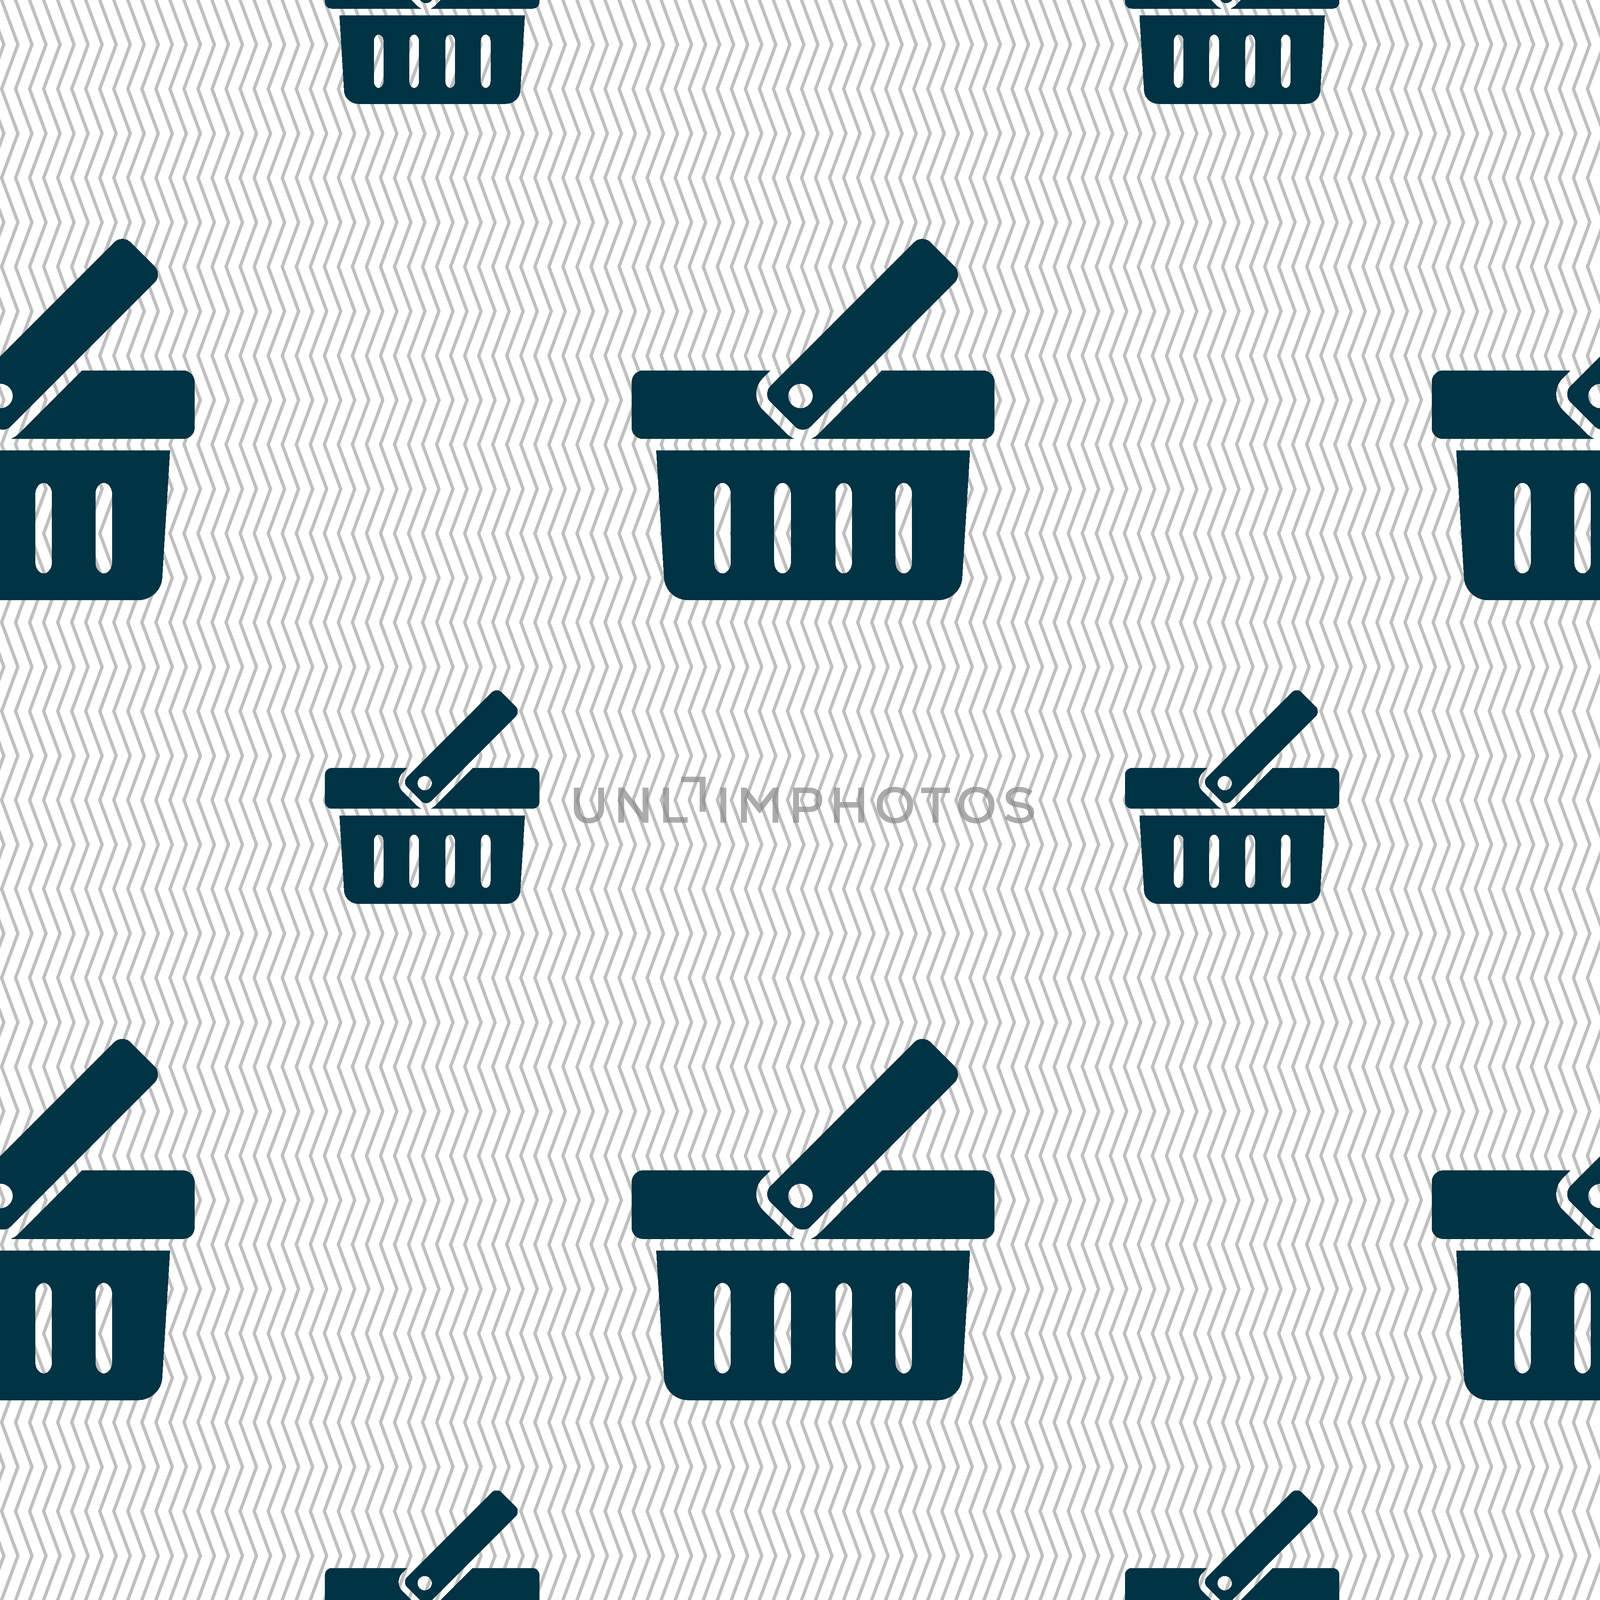 Shopping Cart sign icon. Online buying button. Seamless pattern with geometric texture. illustration